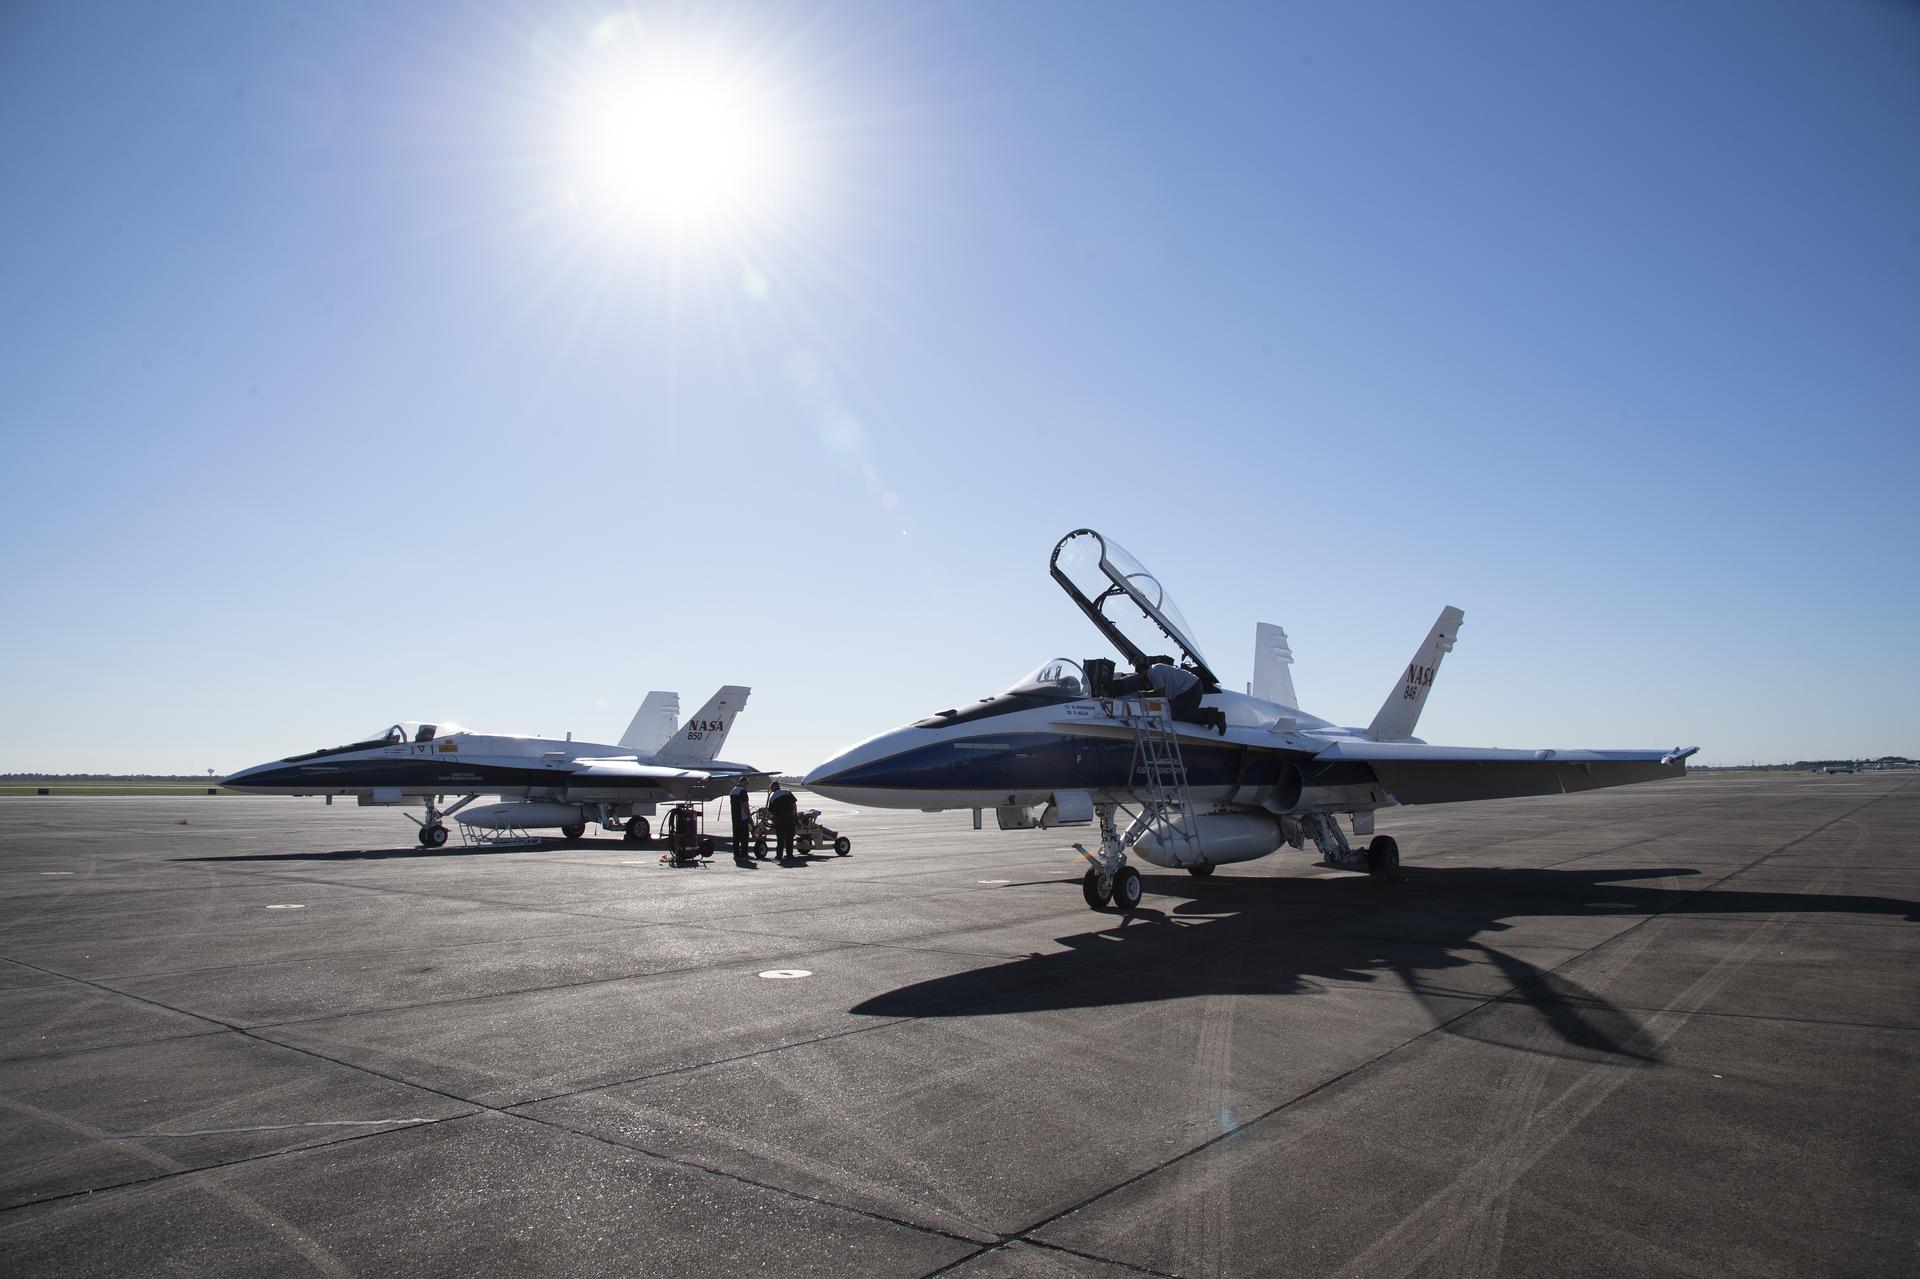 NASA’s F/A-18 research aircraft stands ready prior to a QSF18 supersonic research flight off the coast of Galveston, Texas.